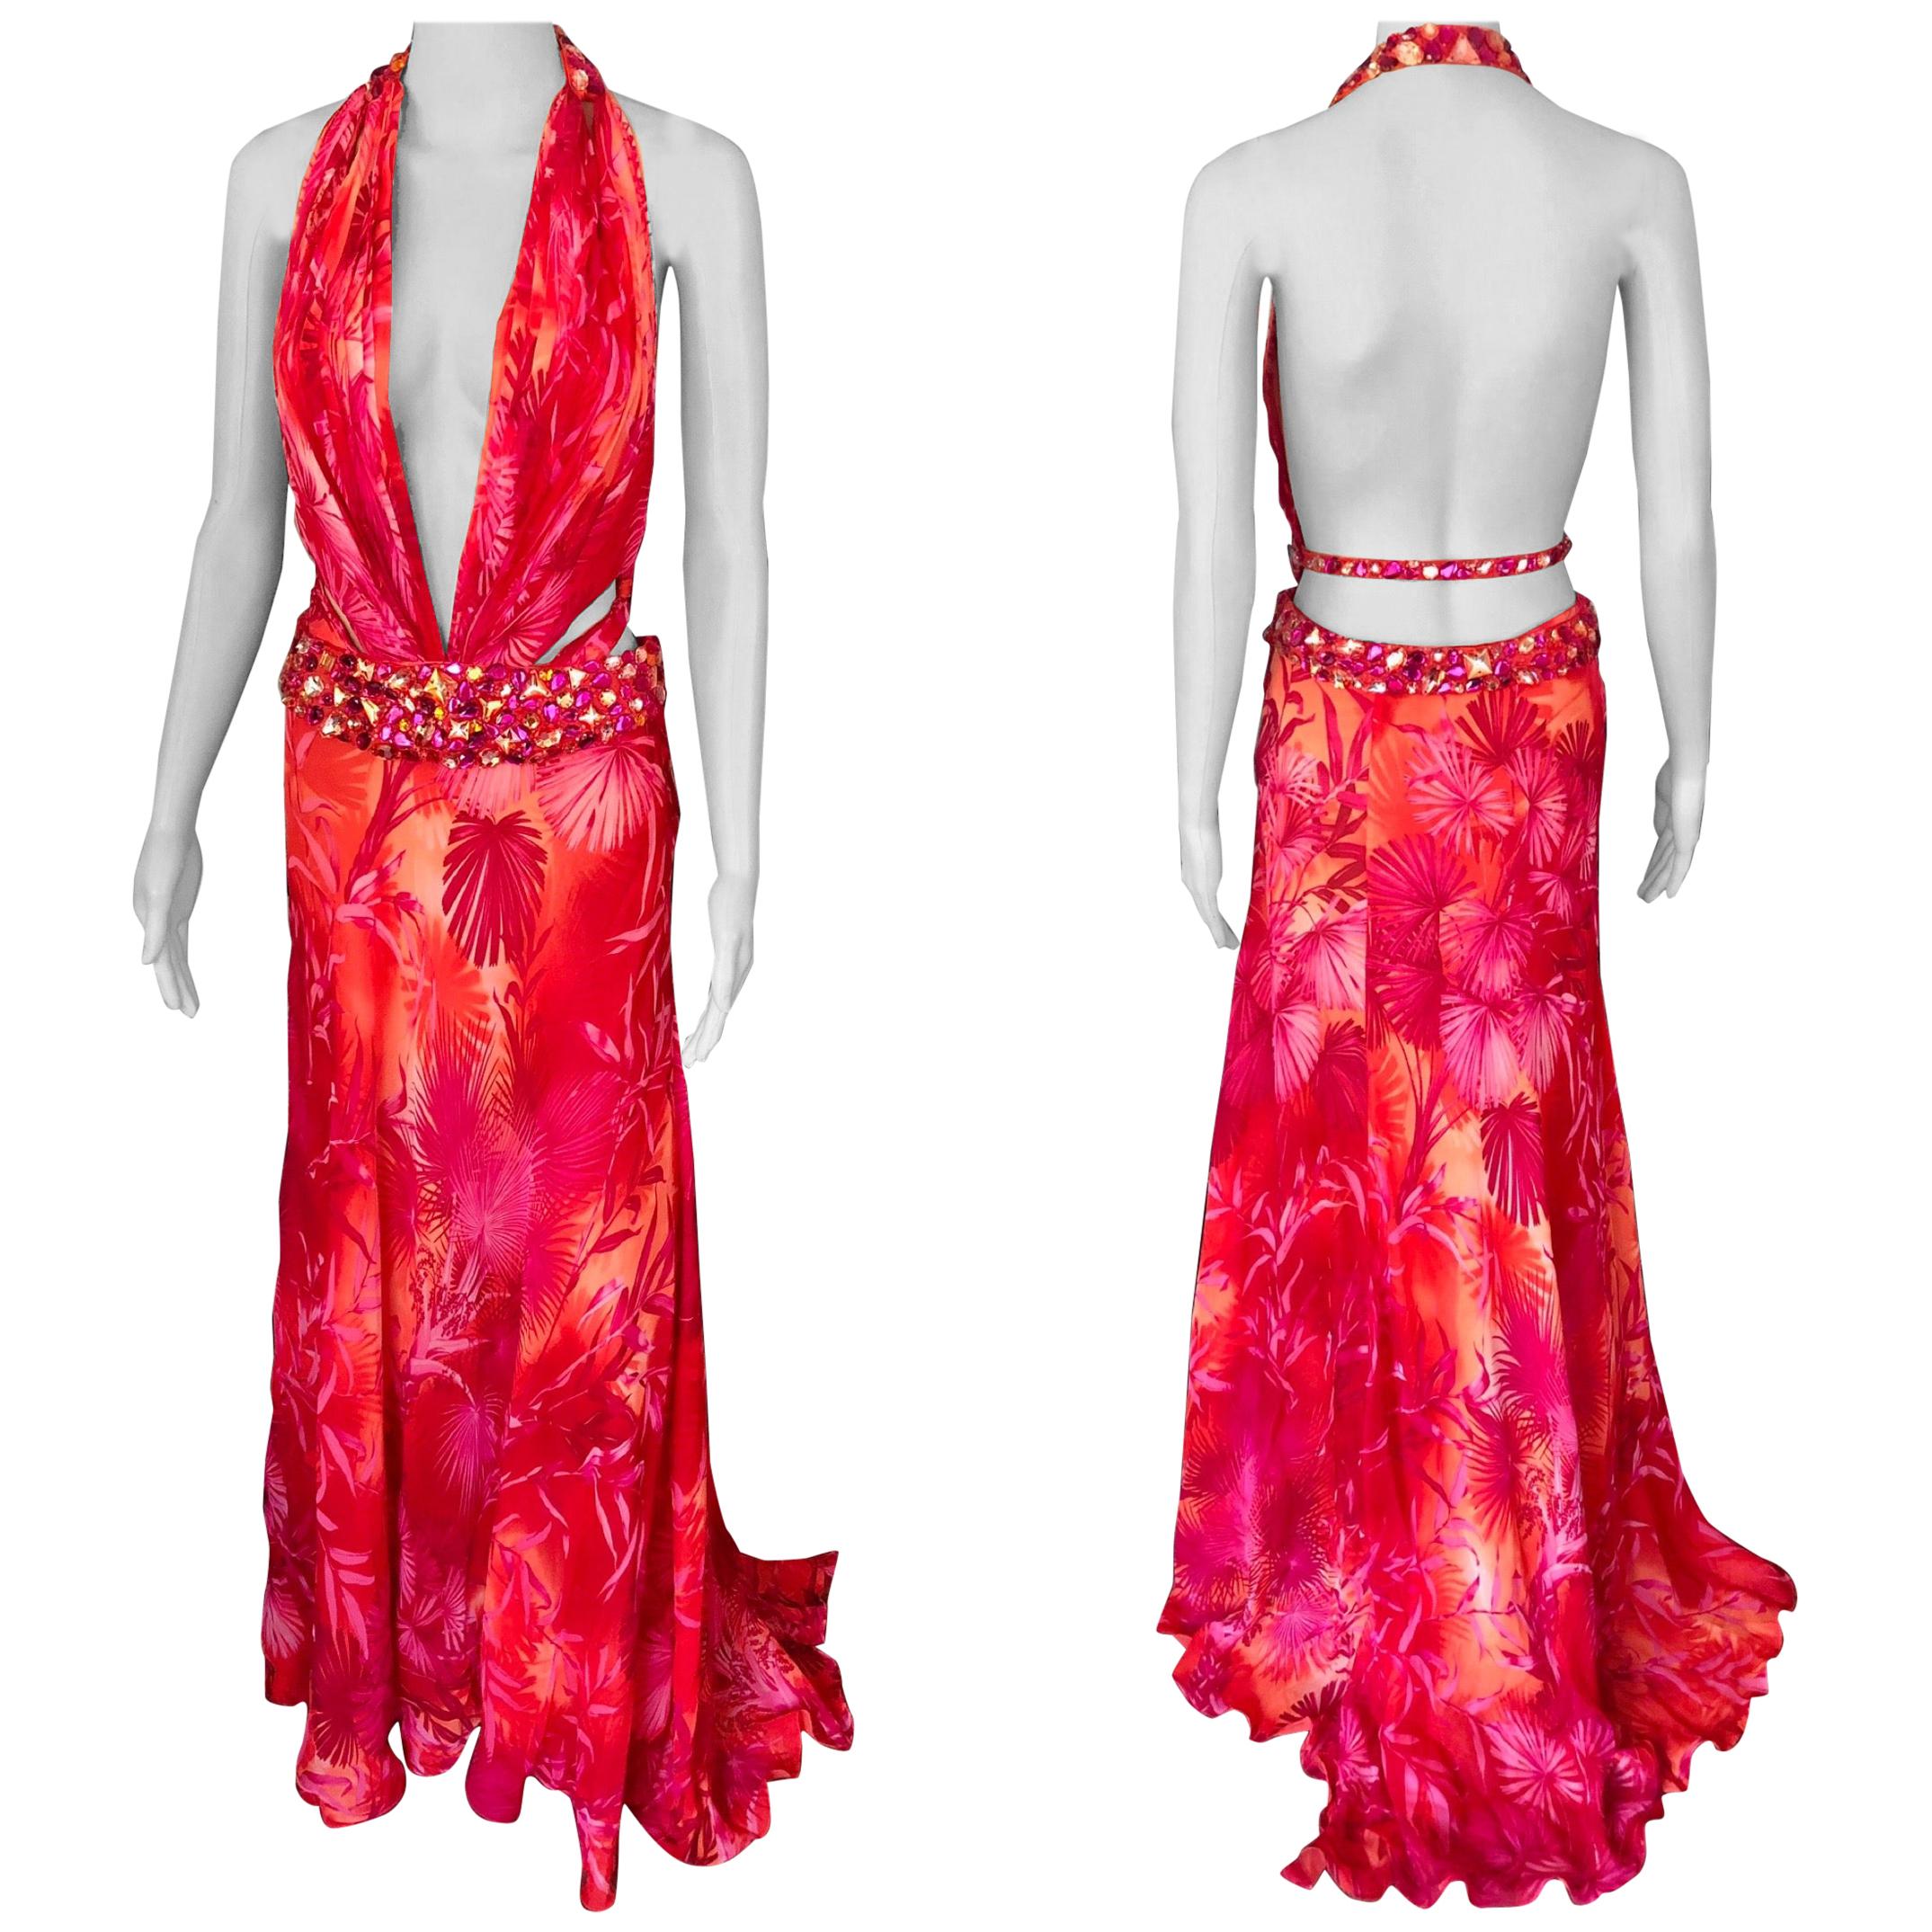 Gianni Versace S/S 2000 Runway Embellished Jungle Print Evening Dress Gown  For Sale at 1stDibs | versace red jungle dress, versace jungle dress